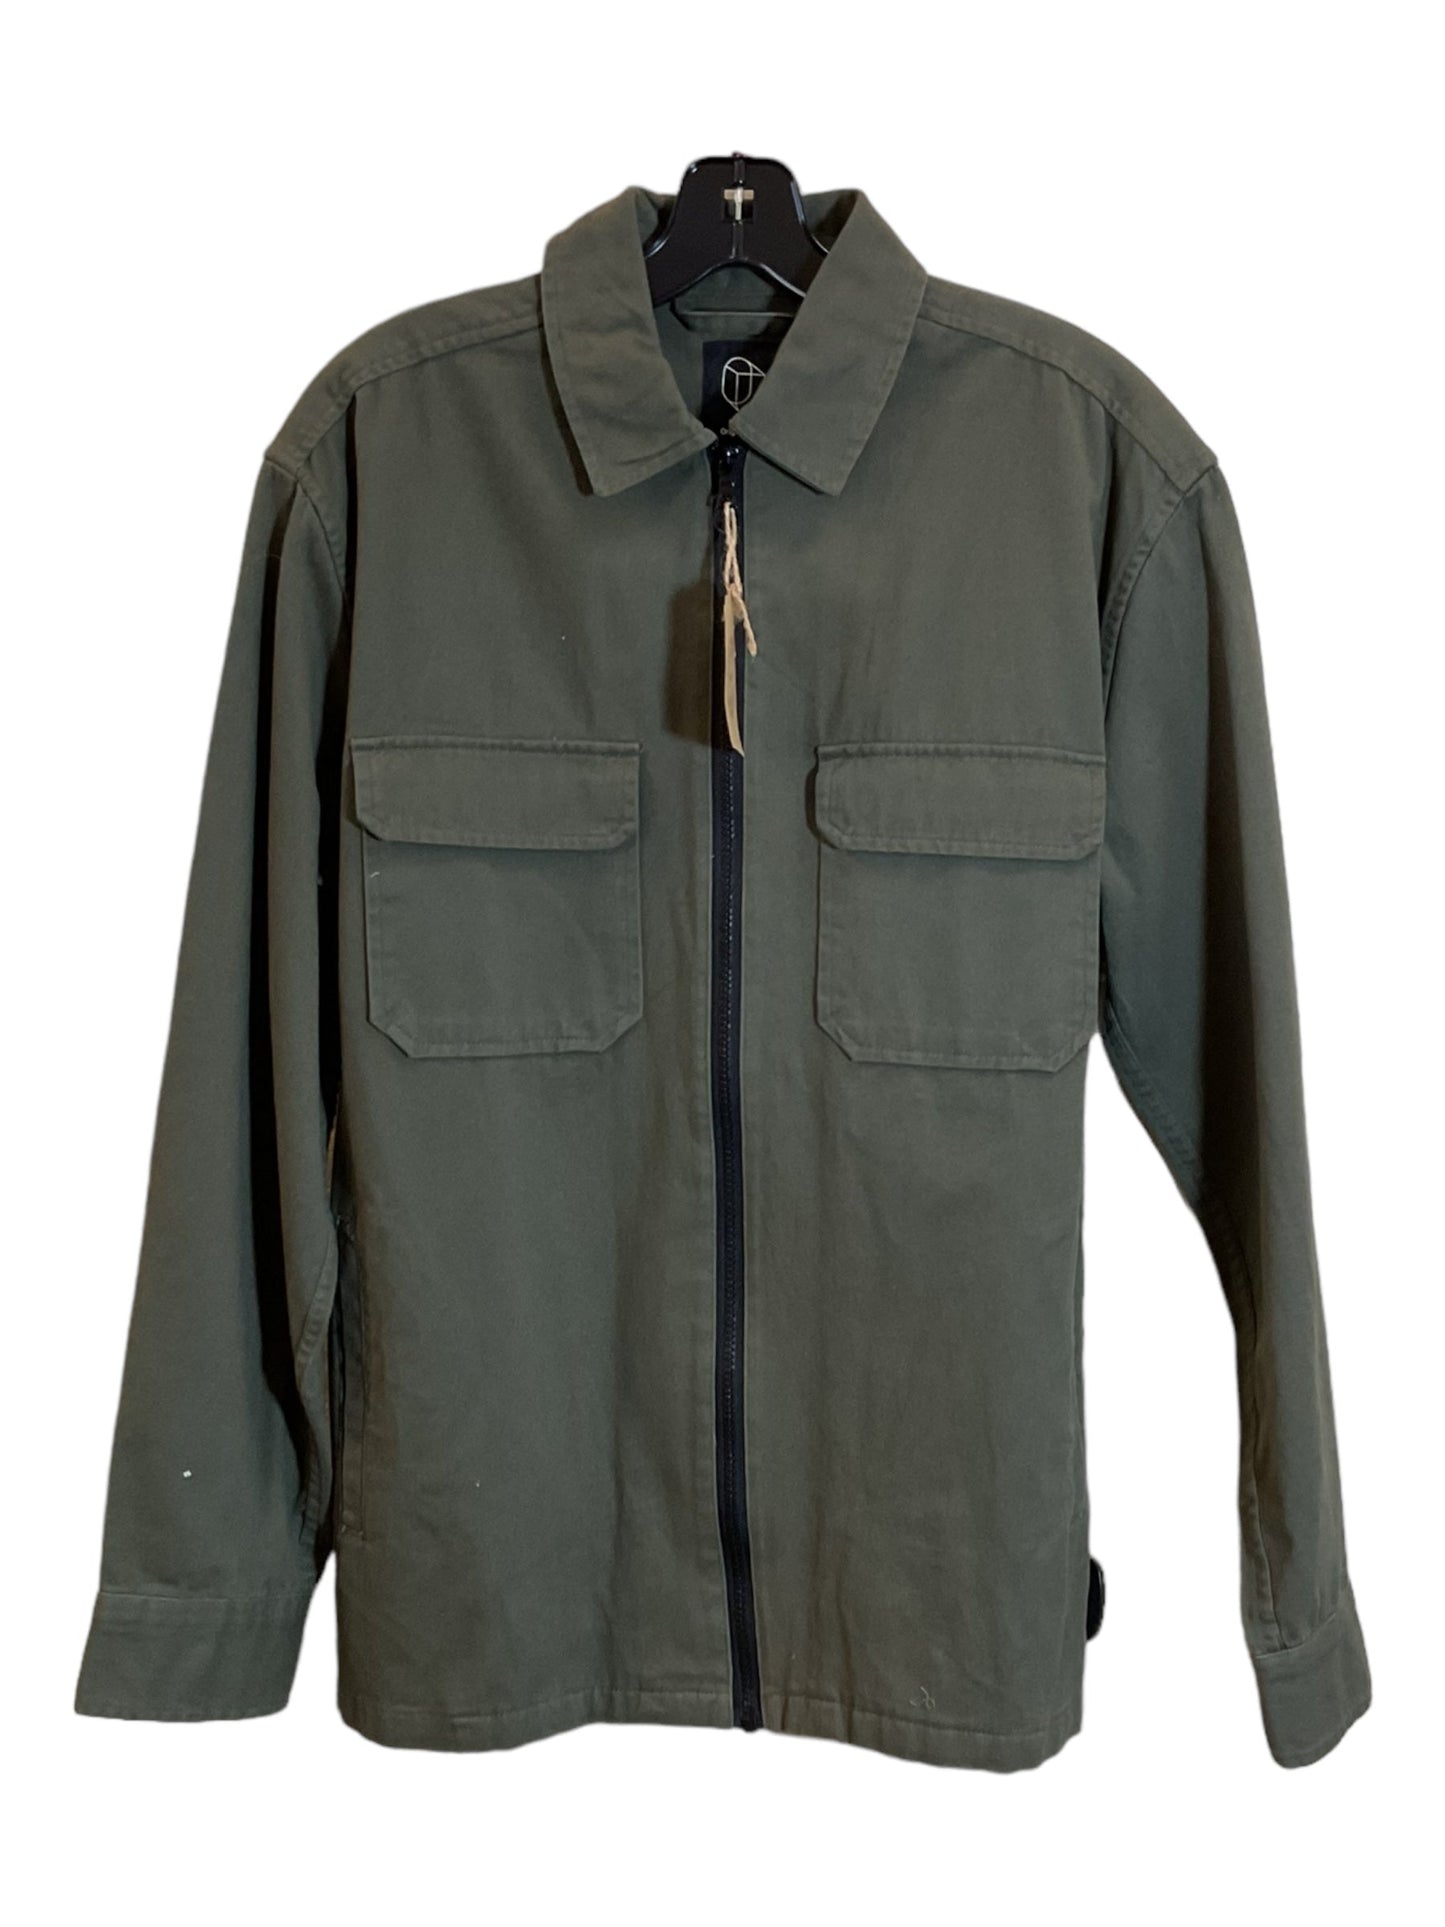 Green Jacket Shirt Clothes Mentor, Size S